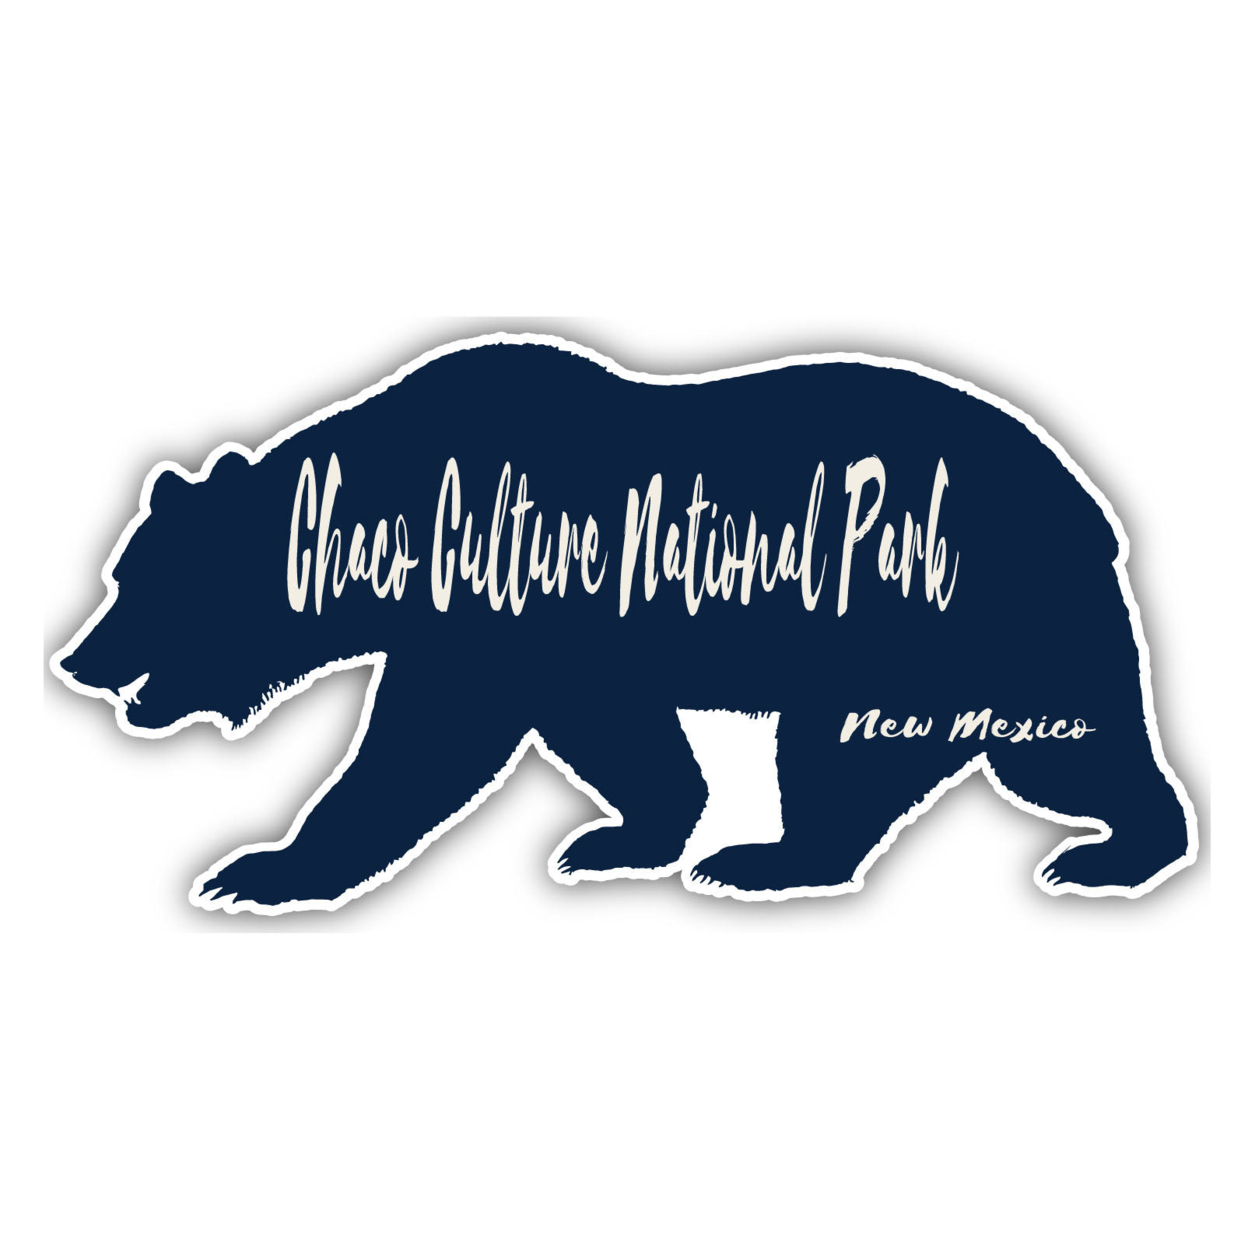 Chaco Culture National Park New Mexico Souvenir Decorative Stickers (Choose Theme And Size) - Single Unit, 6-Inch, Bear